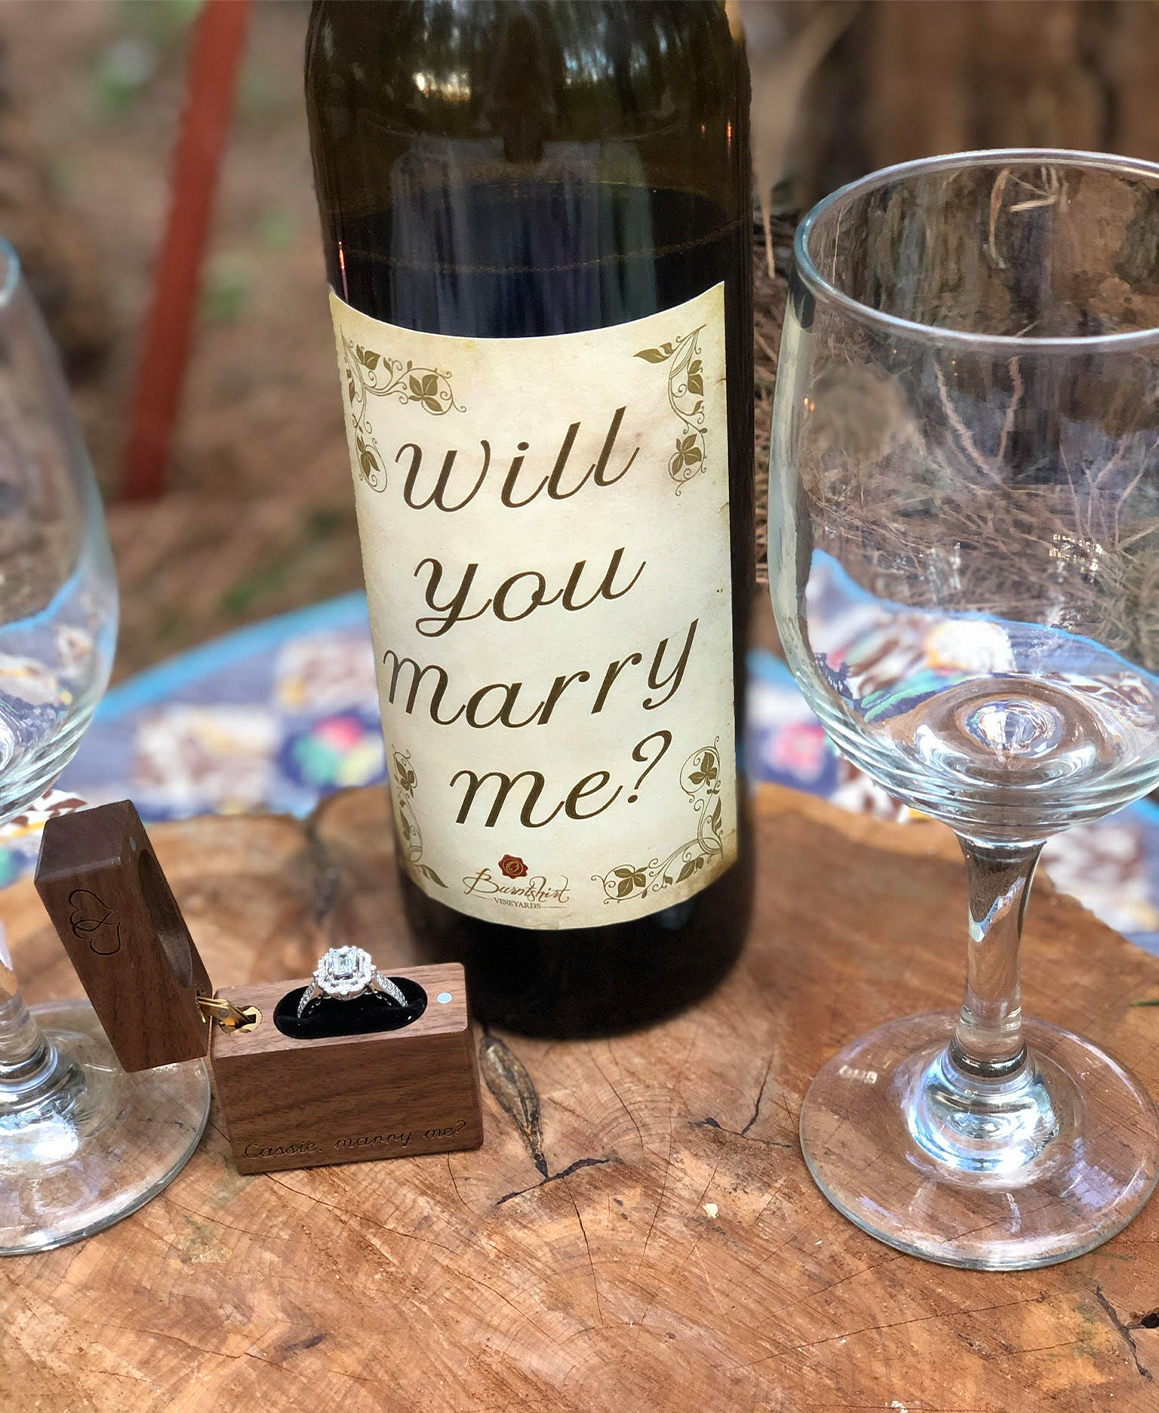 A custom wine bottle, perfect for a proposal